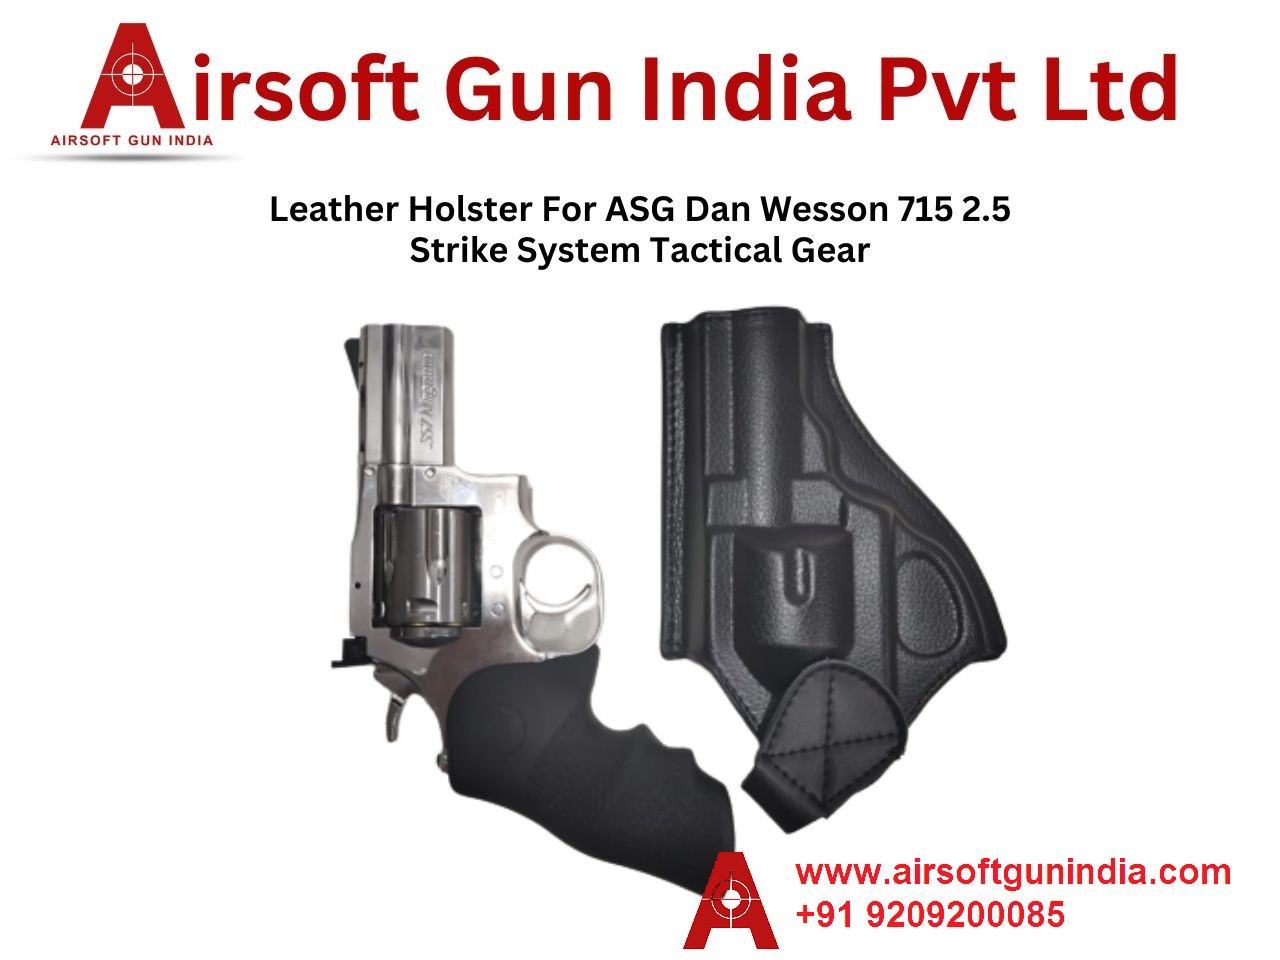 High Quality Holster For ASG Dan Wesson 715 2.5 BB By Airsoft Gun India